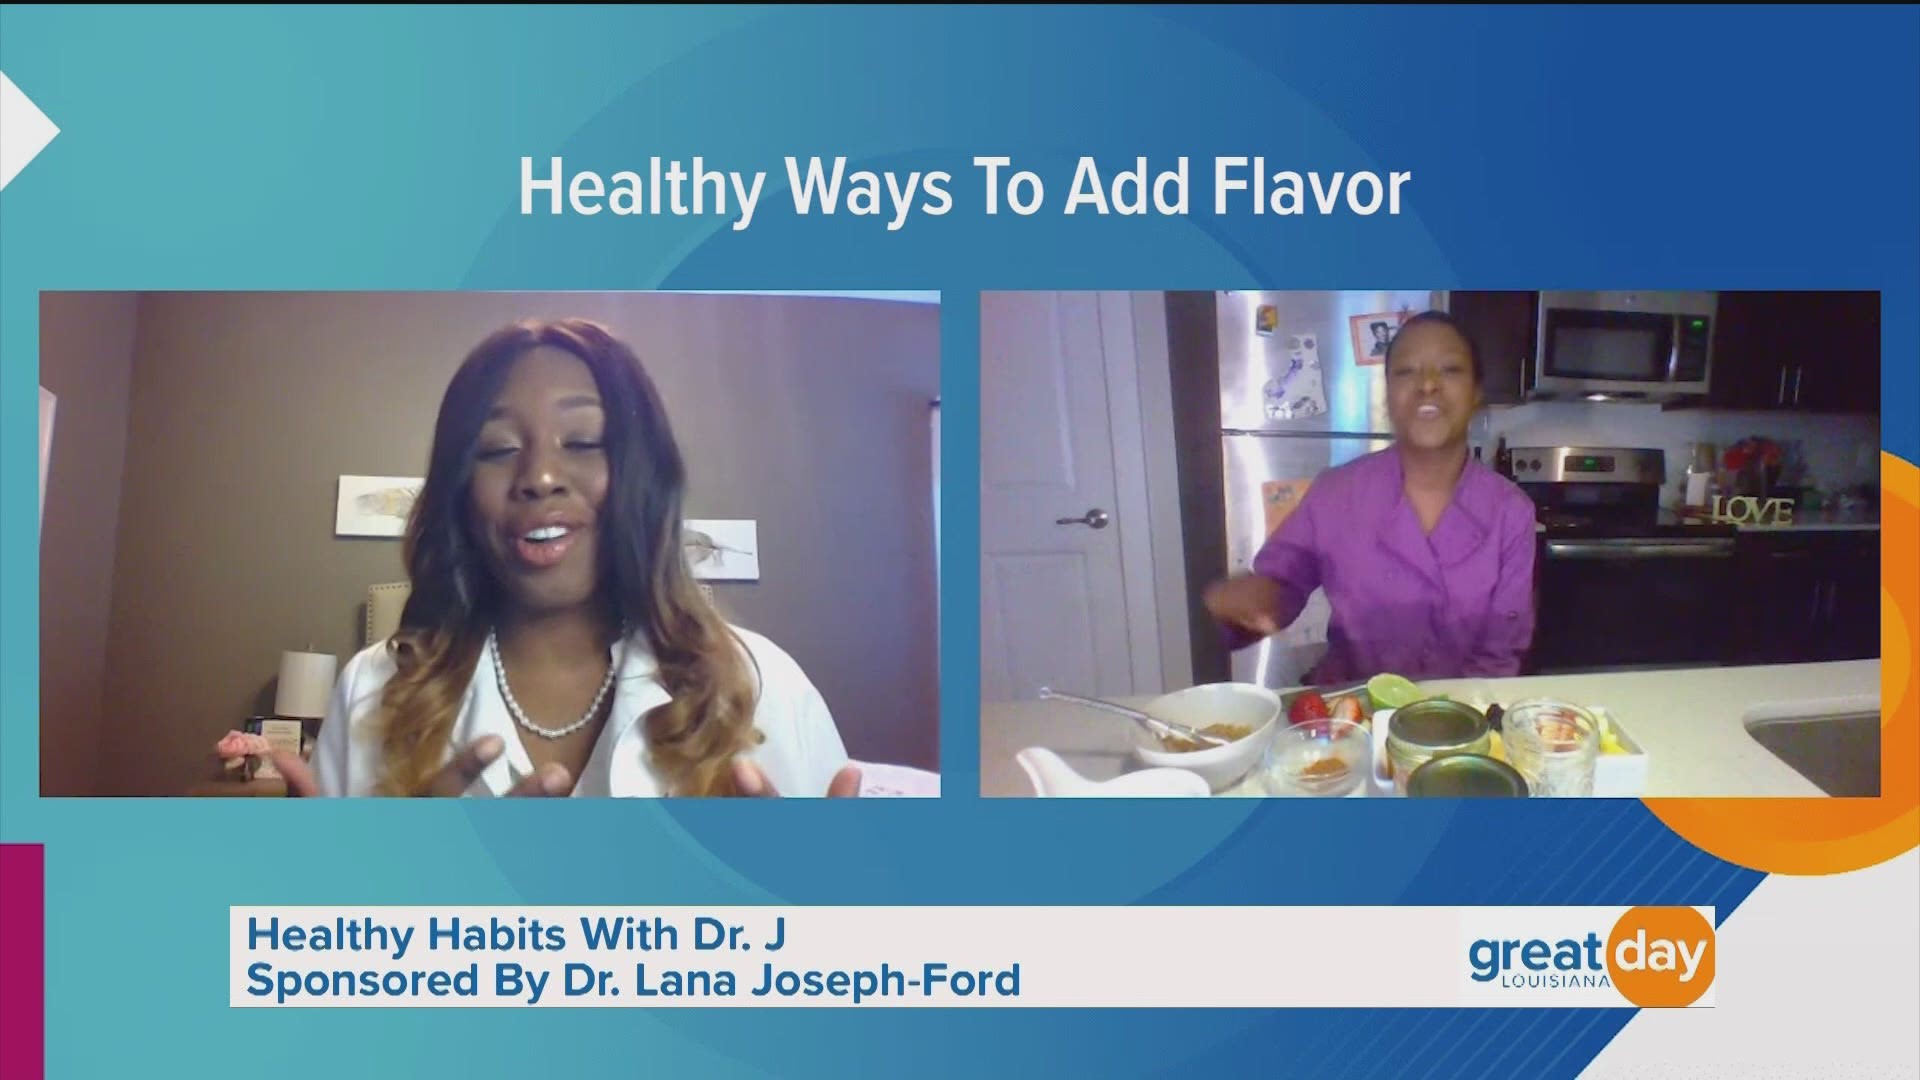 Dr. J is catching up with Celebrity Chef Ashley Jonique to learn how to add flavor and fun to your healthy at-home meals. To learn more, visit drlanajosephford.com